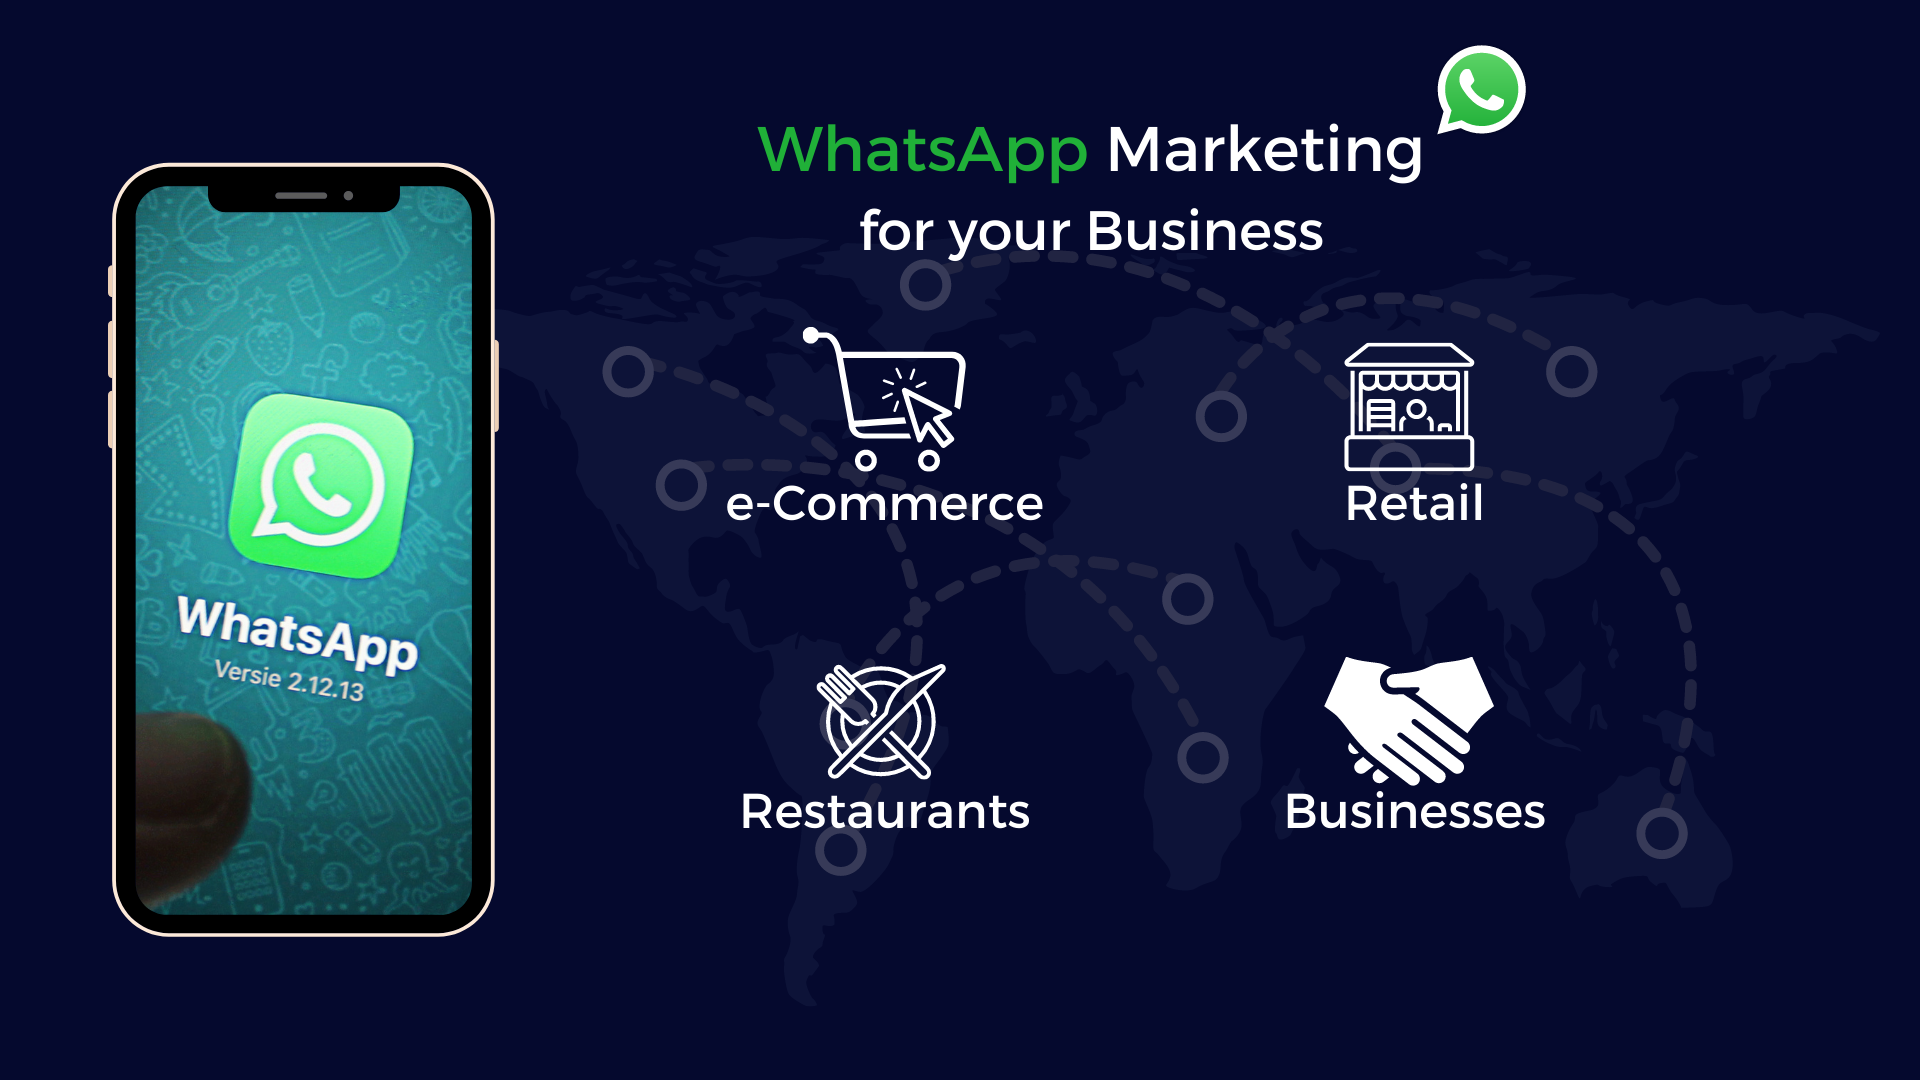 Bulk whatsapp marketing services and solutions